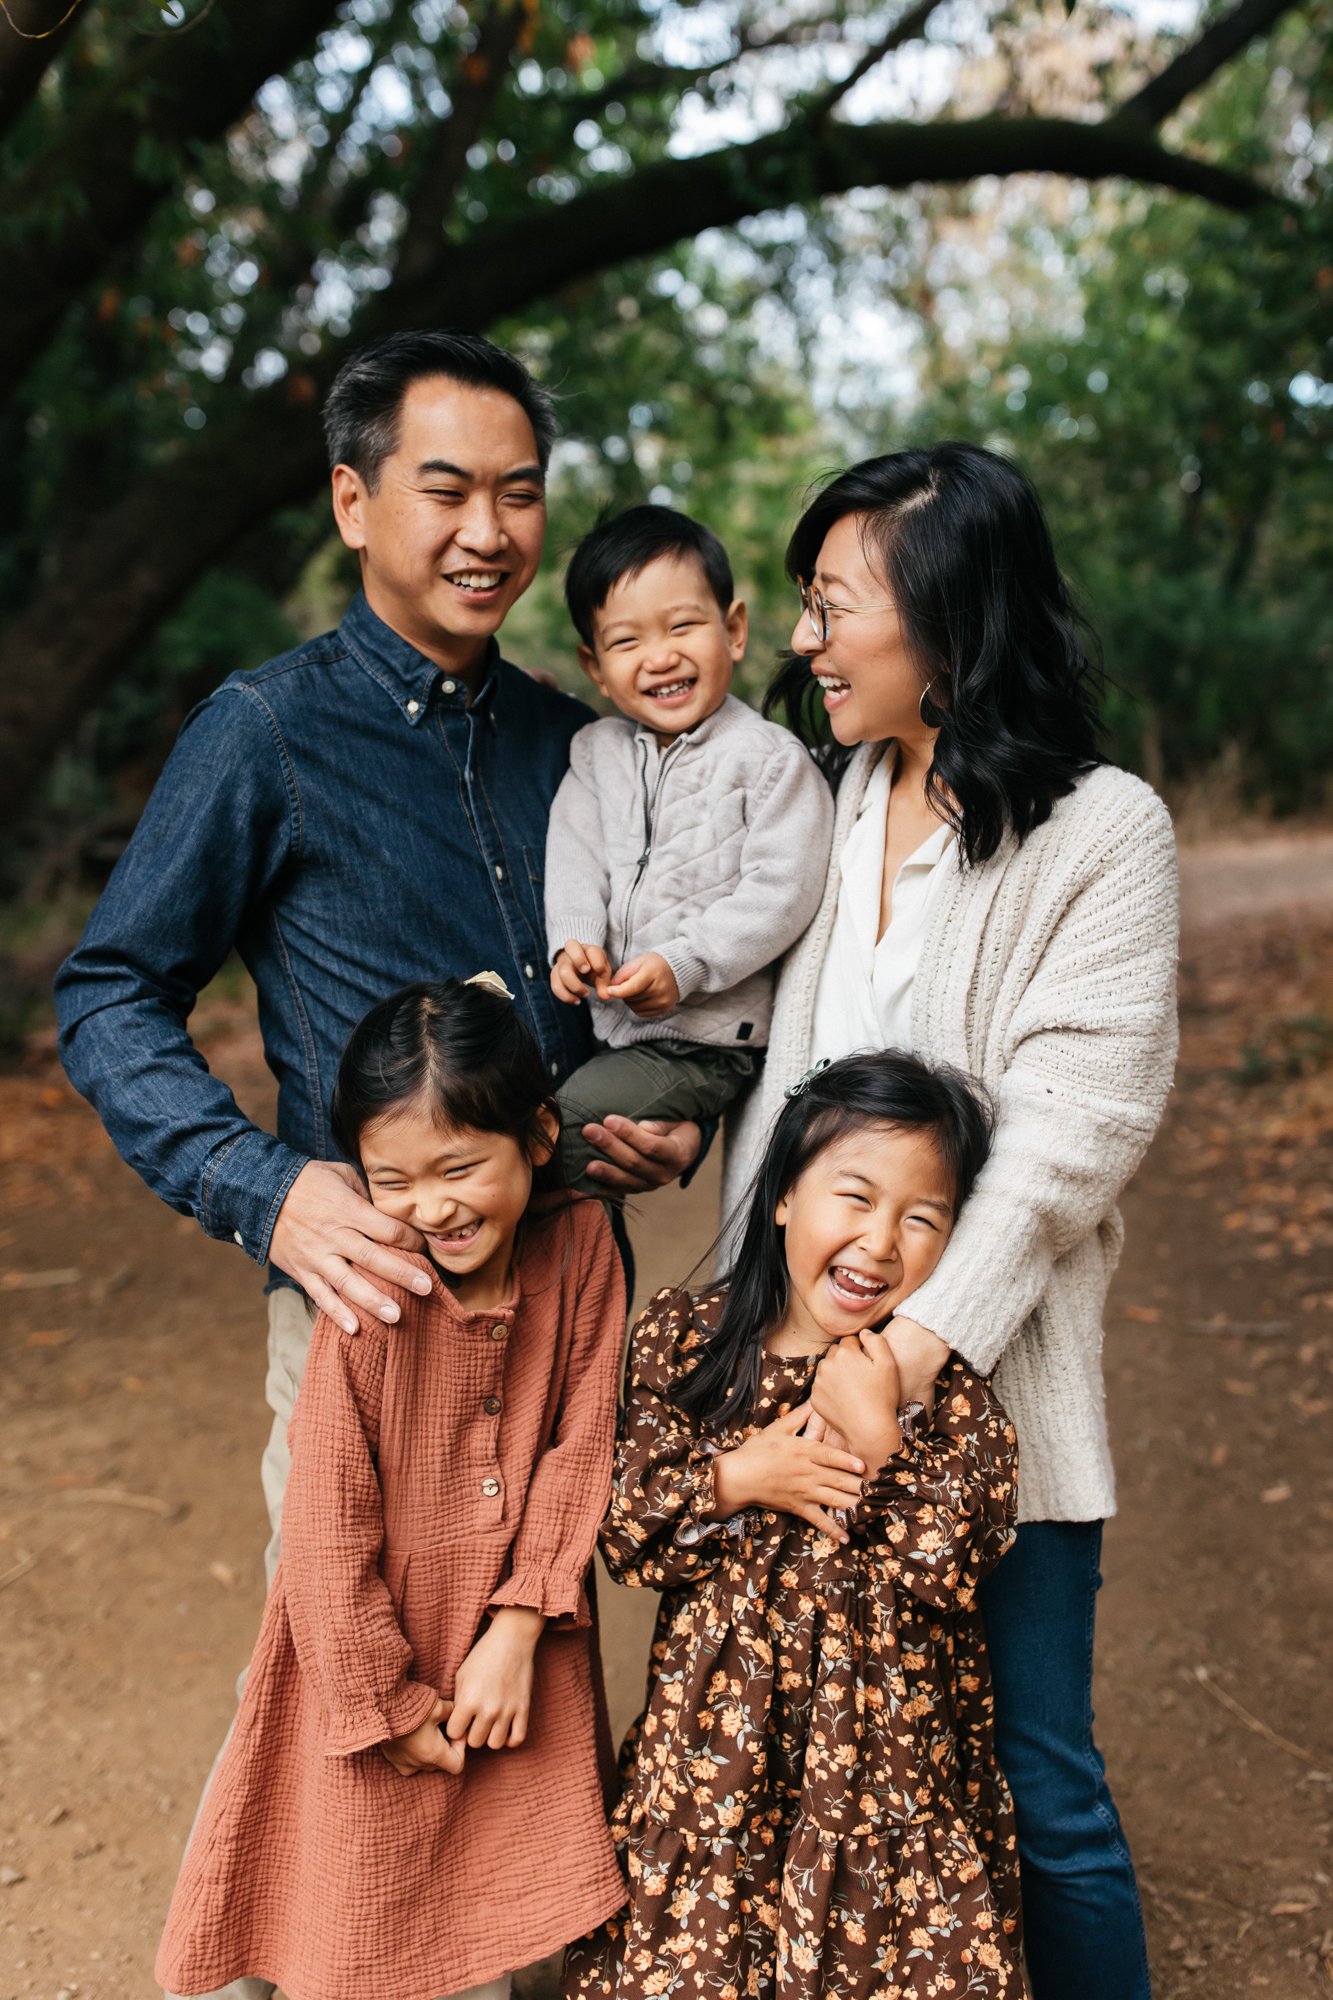 outdoor family outfit photo ideas from san francisco family photographer and marin family photographer Cristin More_3.jpg